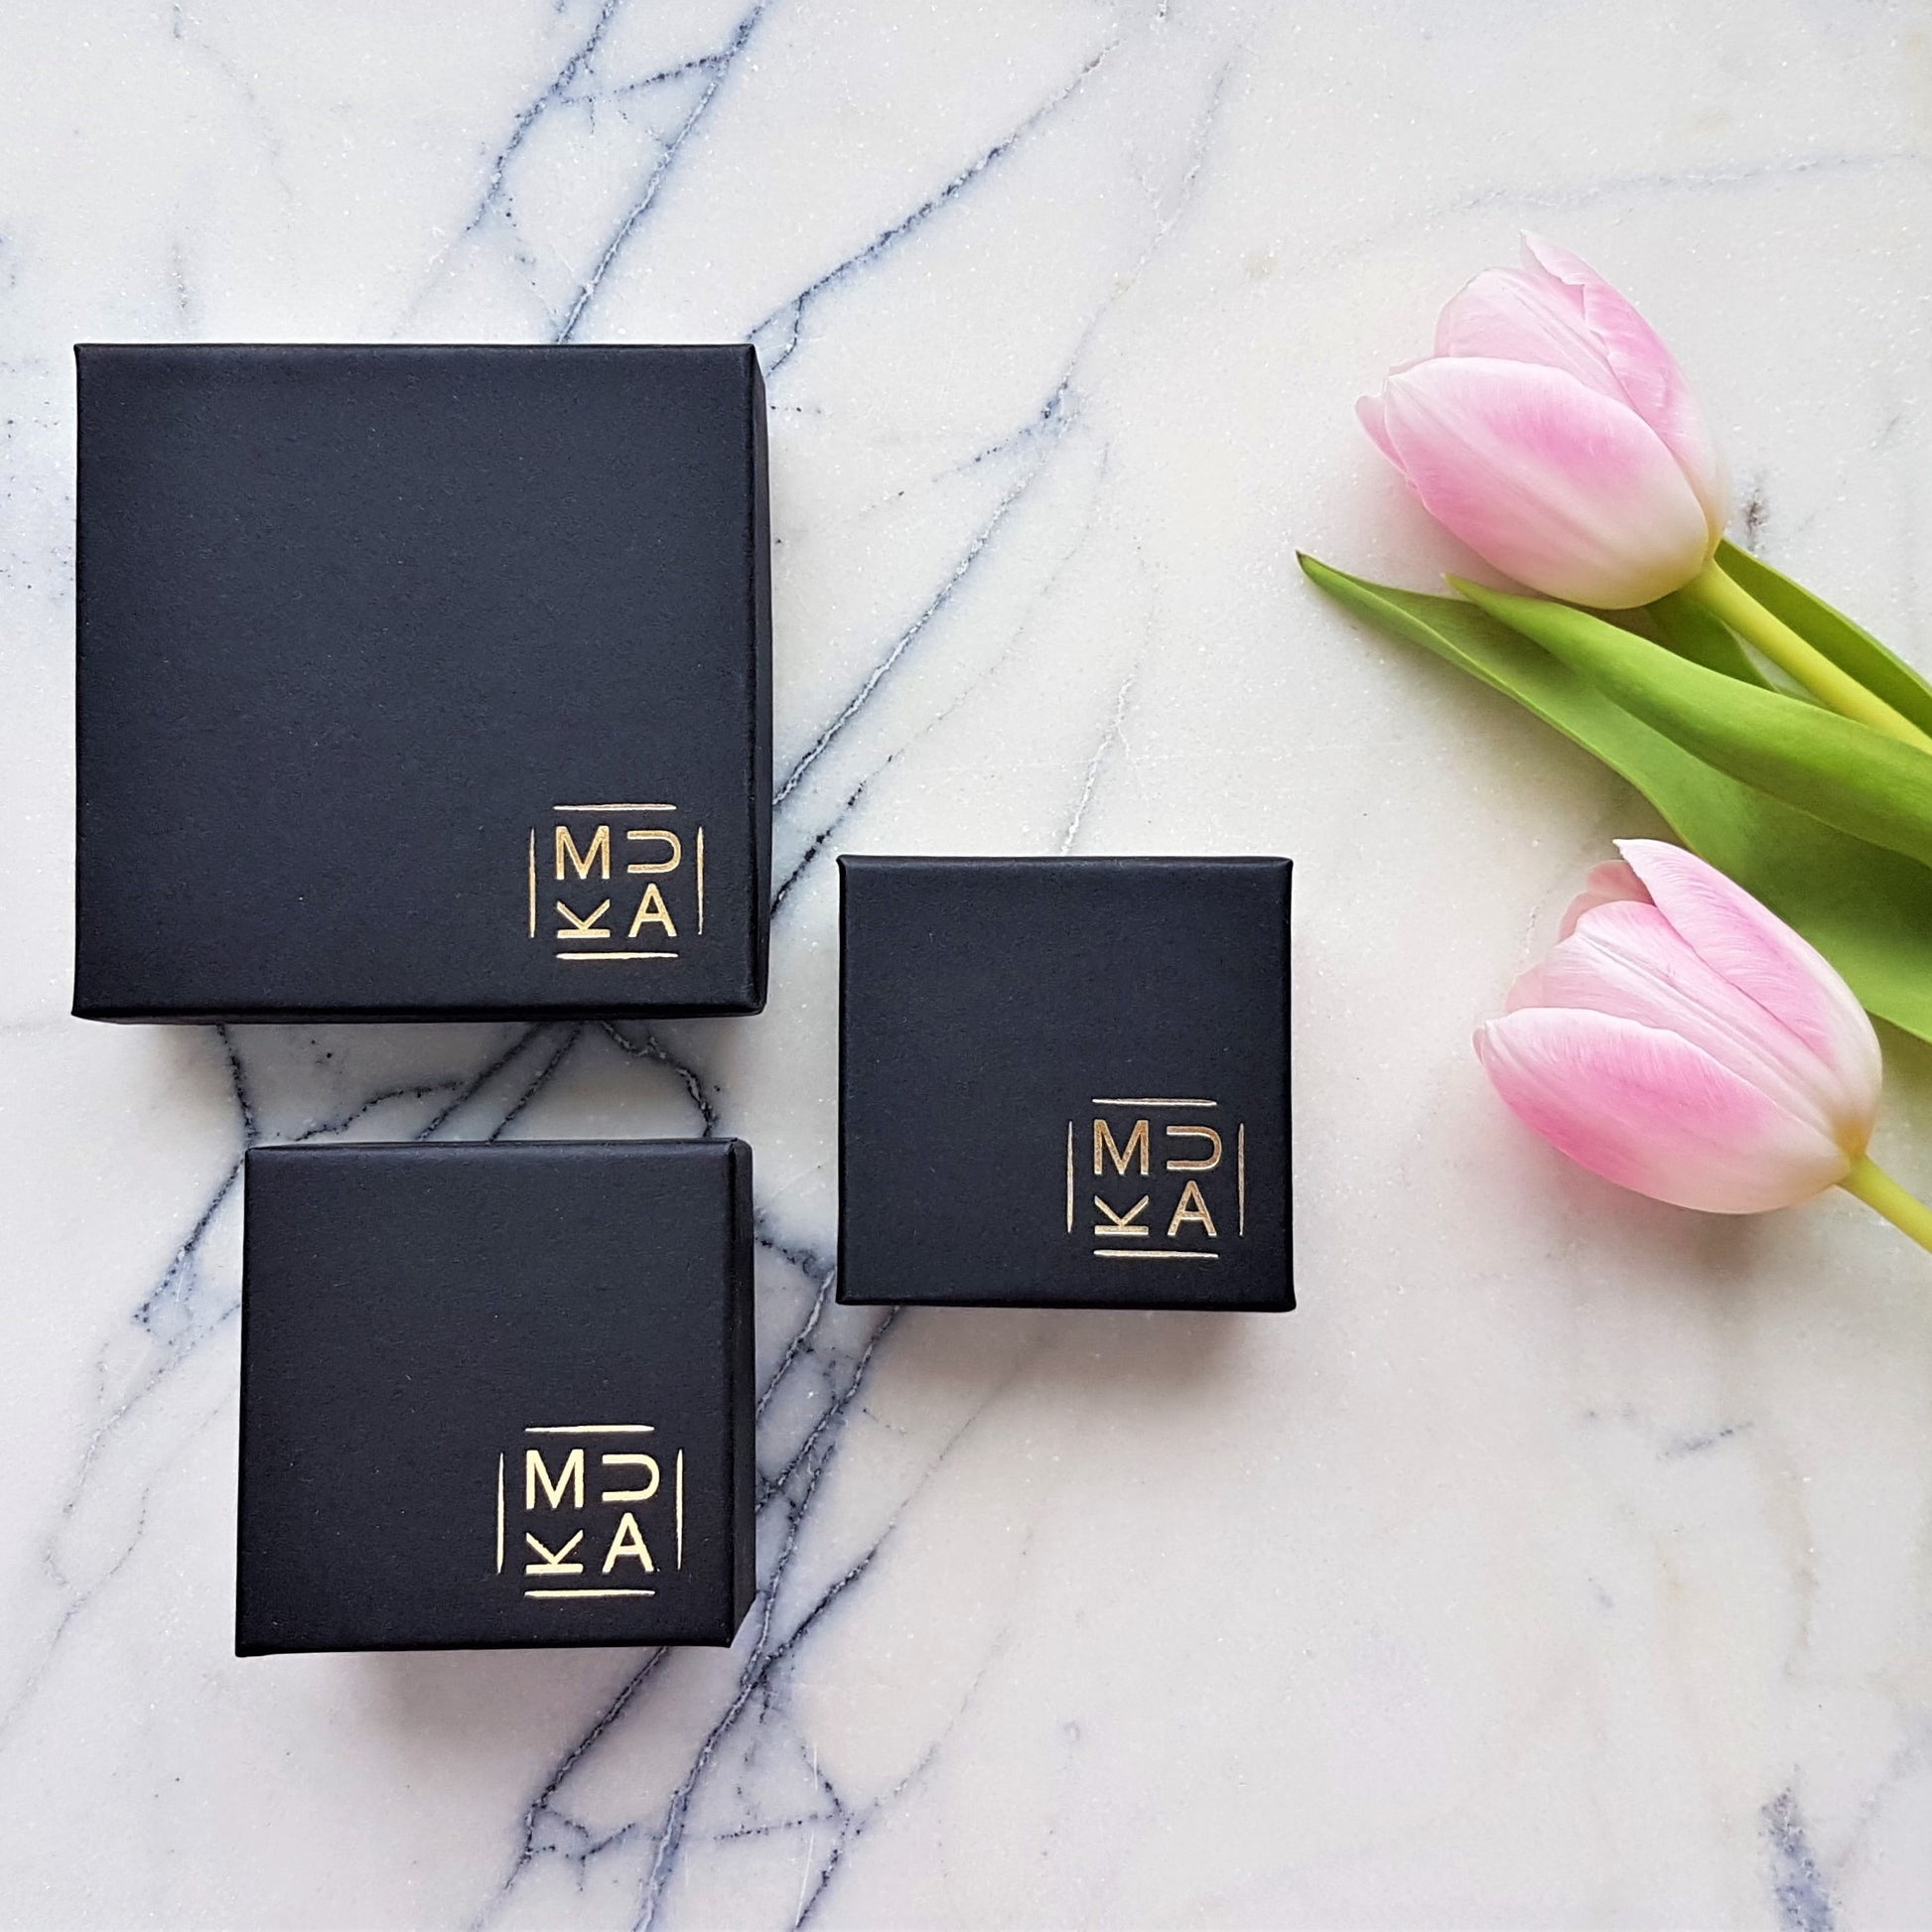 MUKA studio packaging, black jewellery boxes with gold logo placed on marble tile next to pink tulip flowers